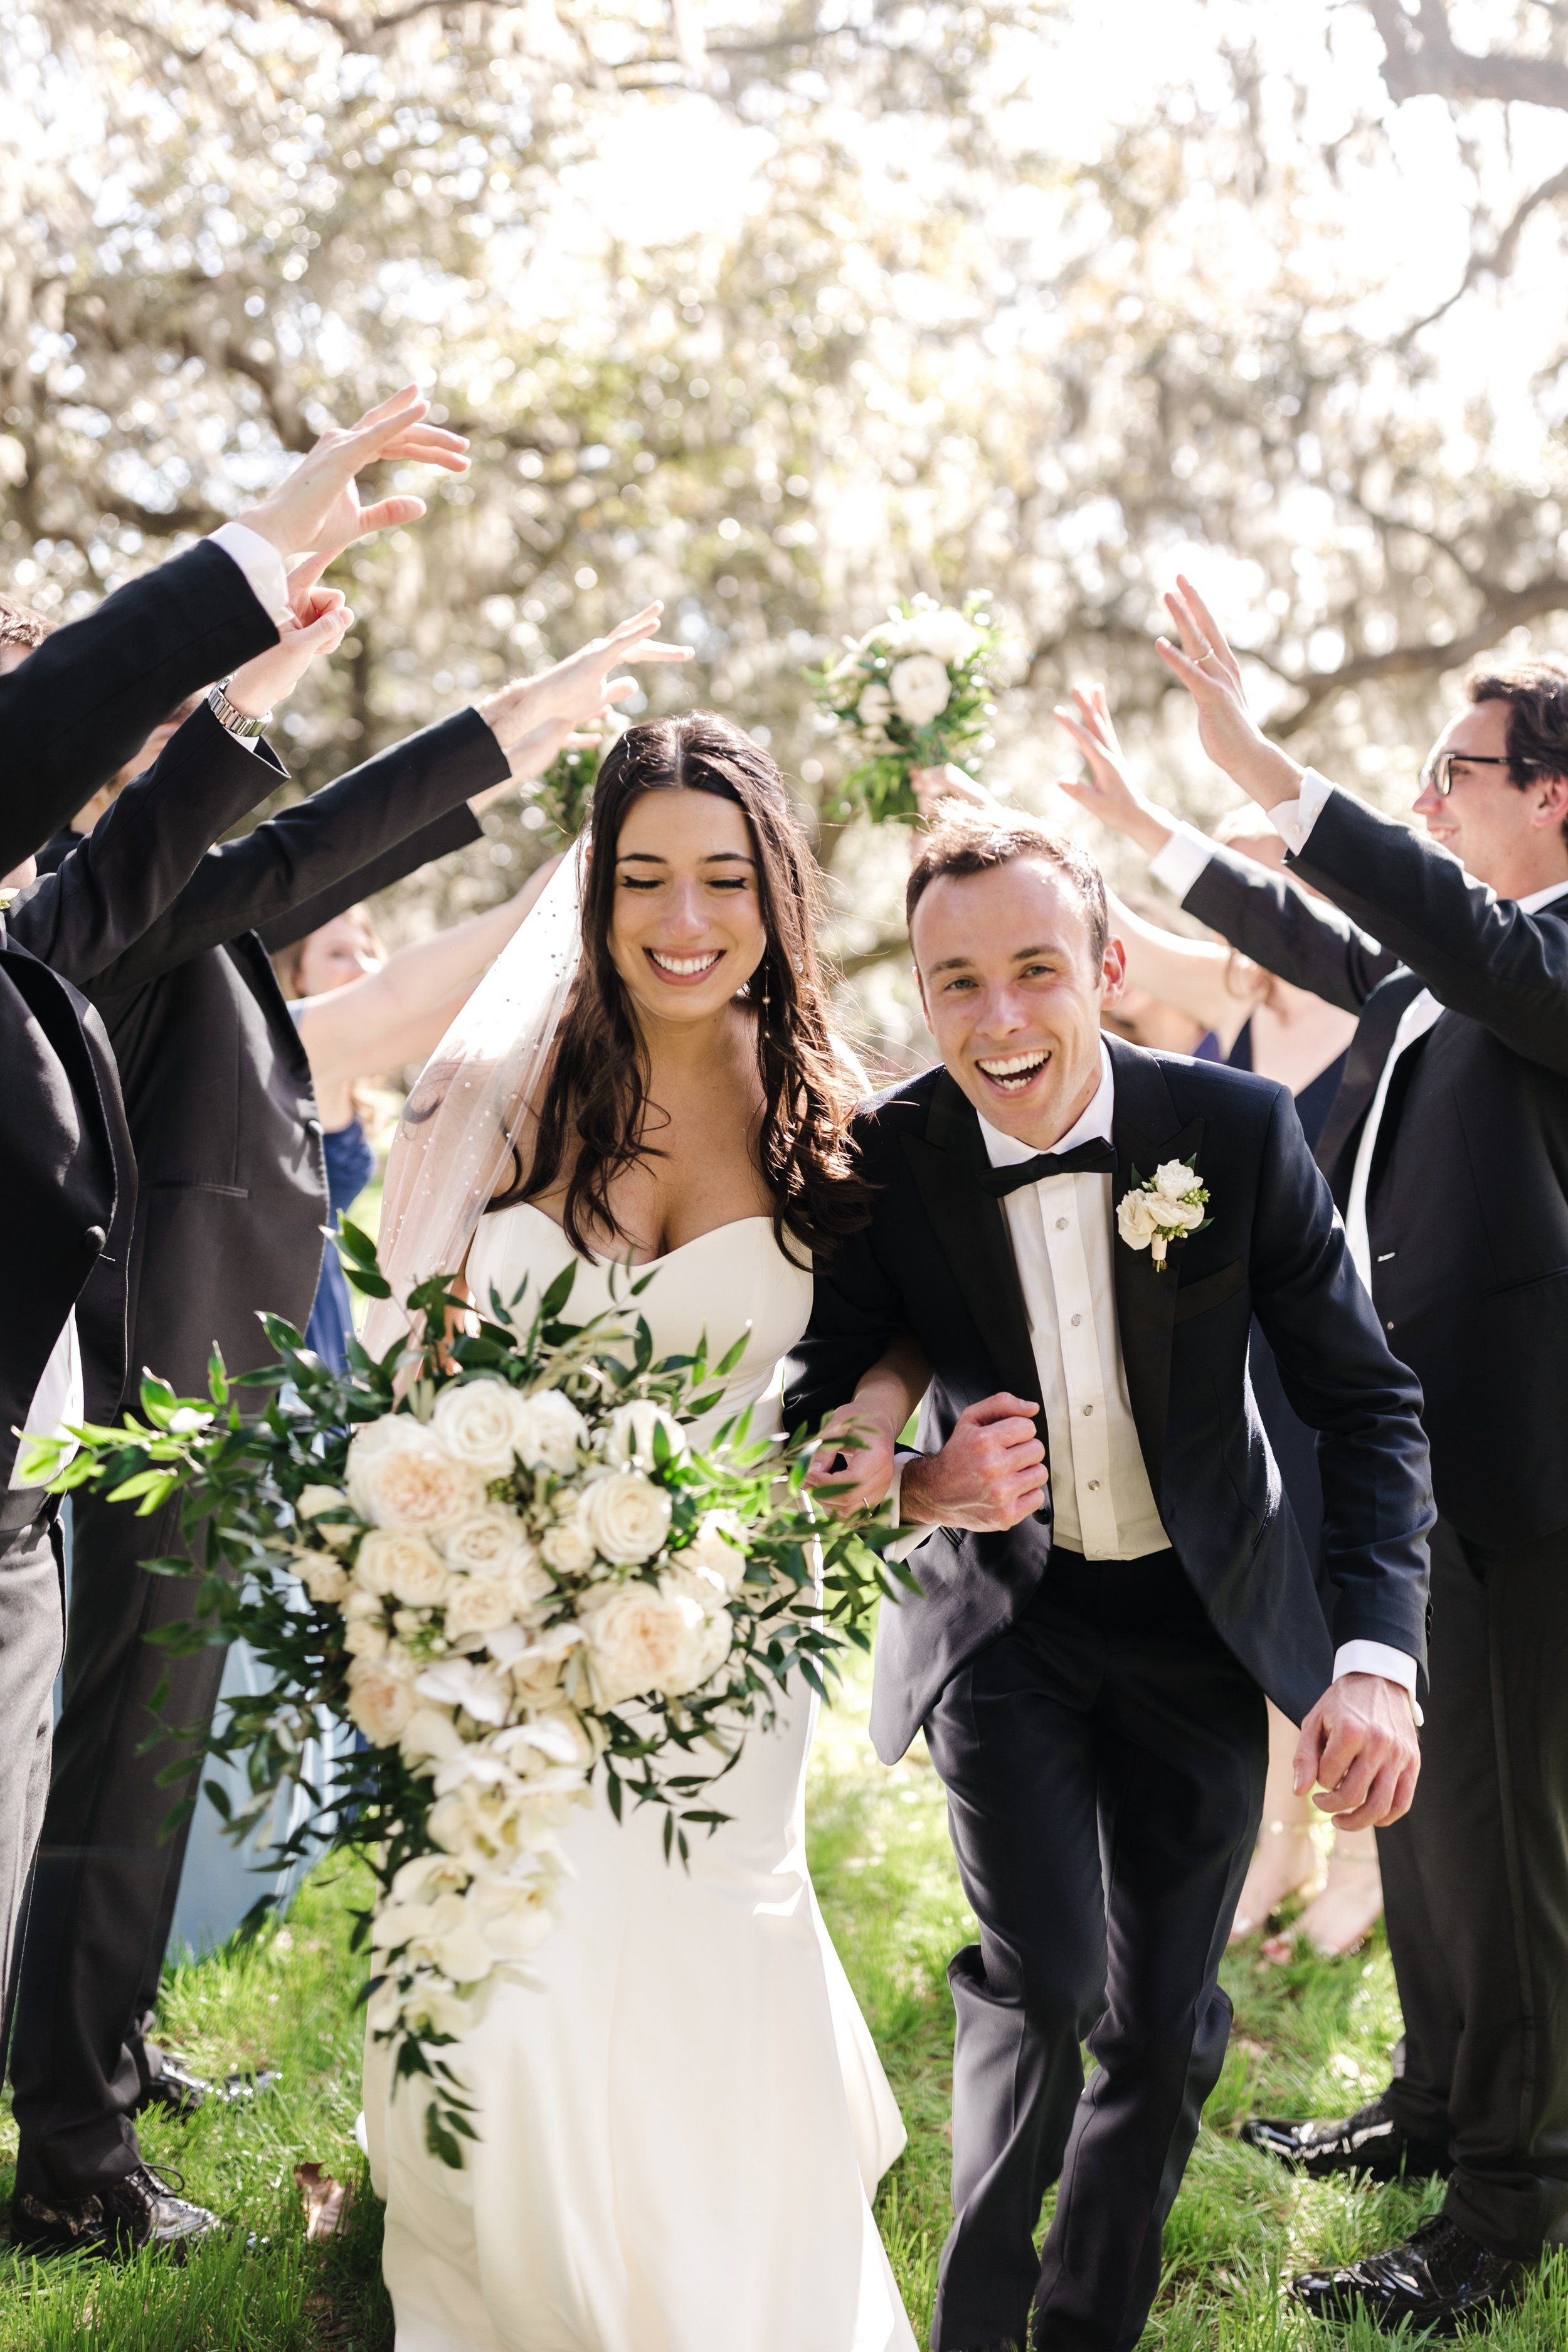 ivory-and-beau-wedding-and-florals-annelise-and-preston-wedding-blog-savannah-wedding-savannah-wedding-coordinator-savannah-florsit-wedding-florist-southern-wedding-forsyth-park-fountain-soho-south-savannah-wedding-gmp20199345-393.jpg